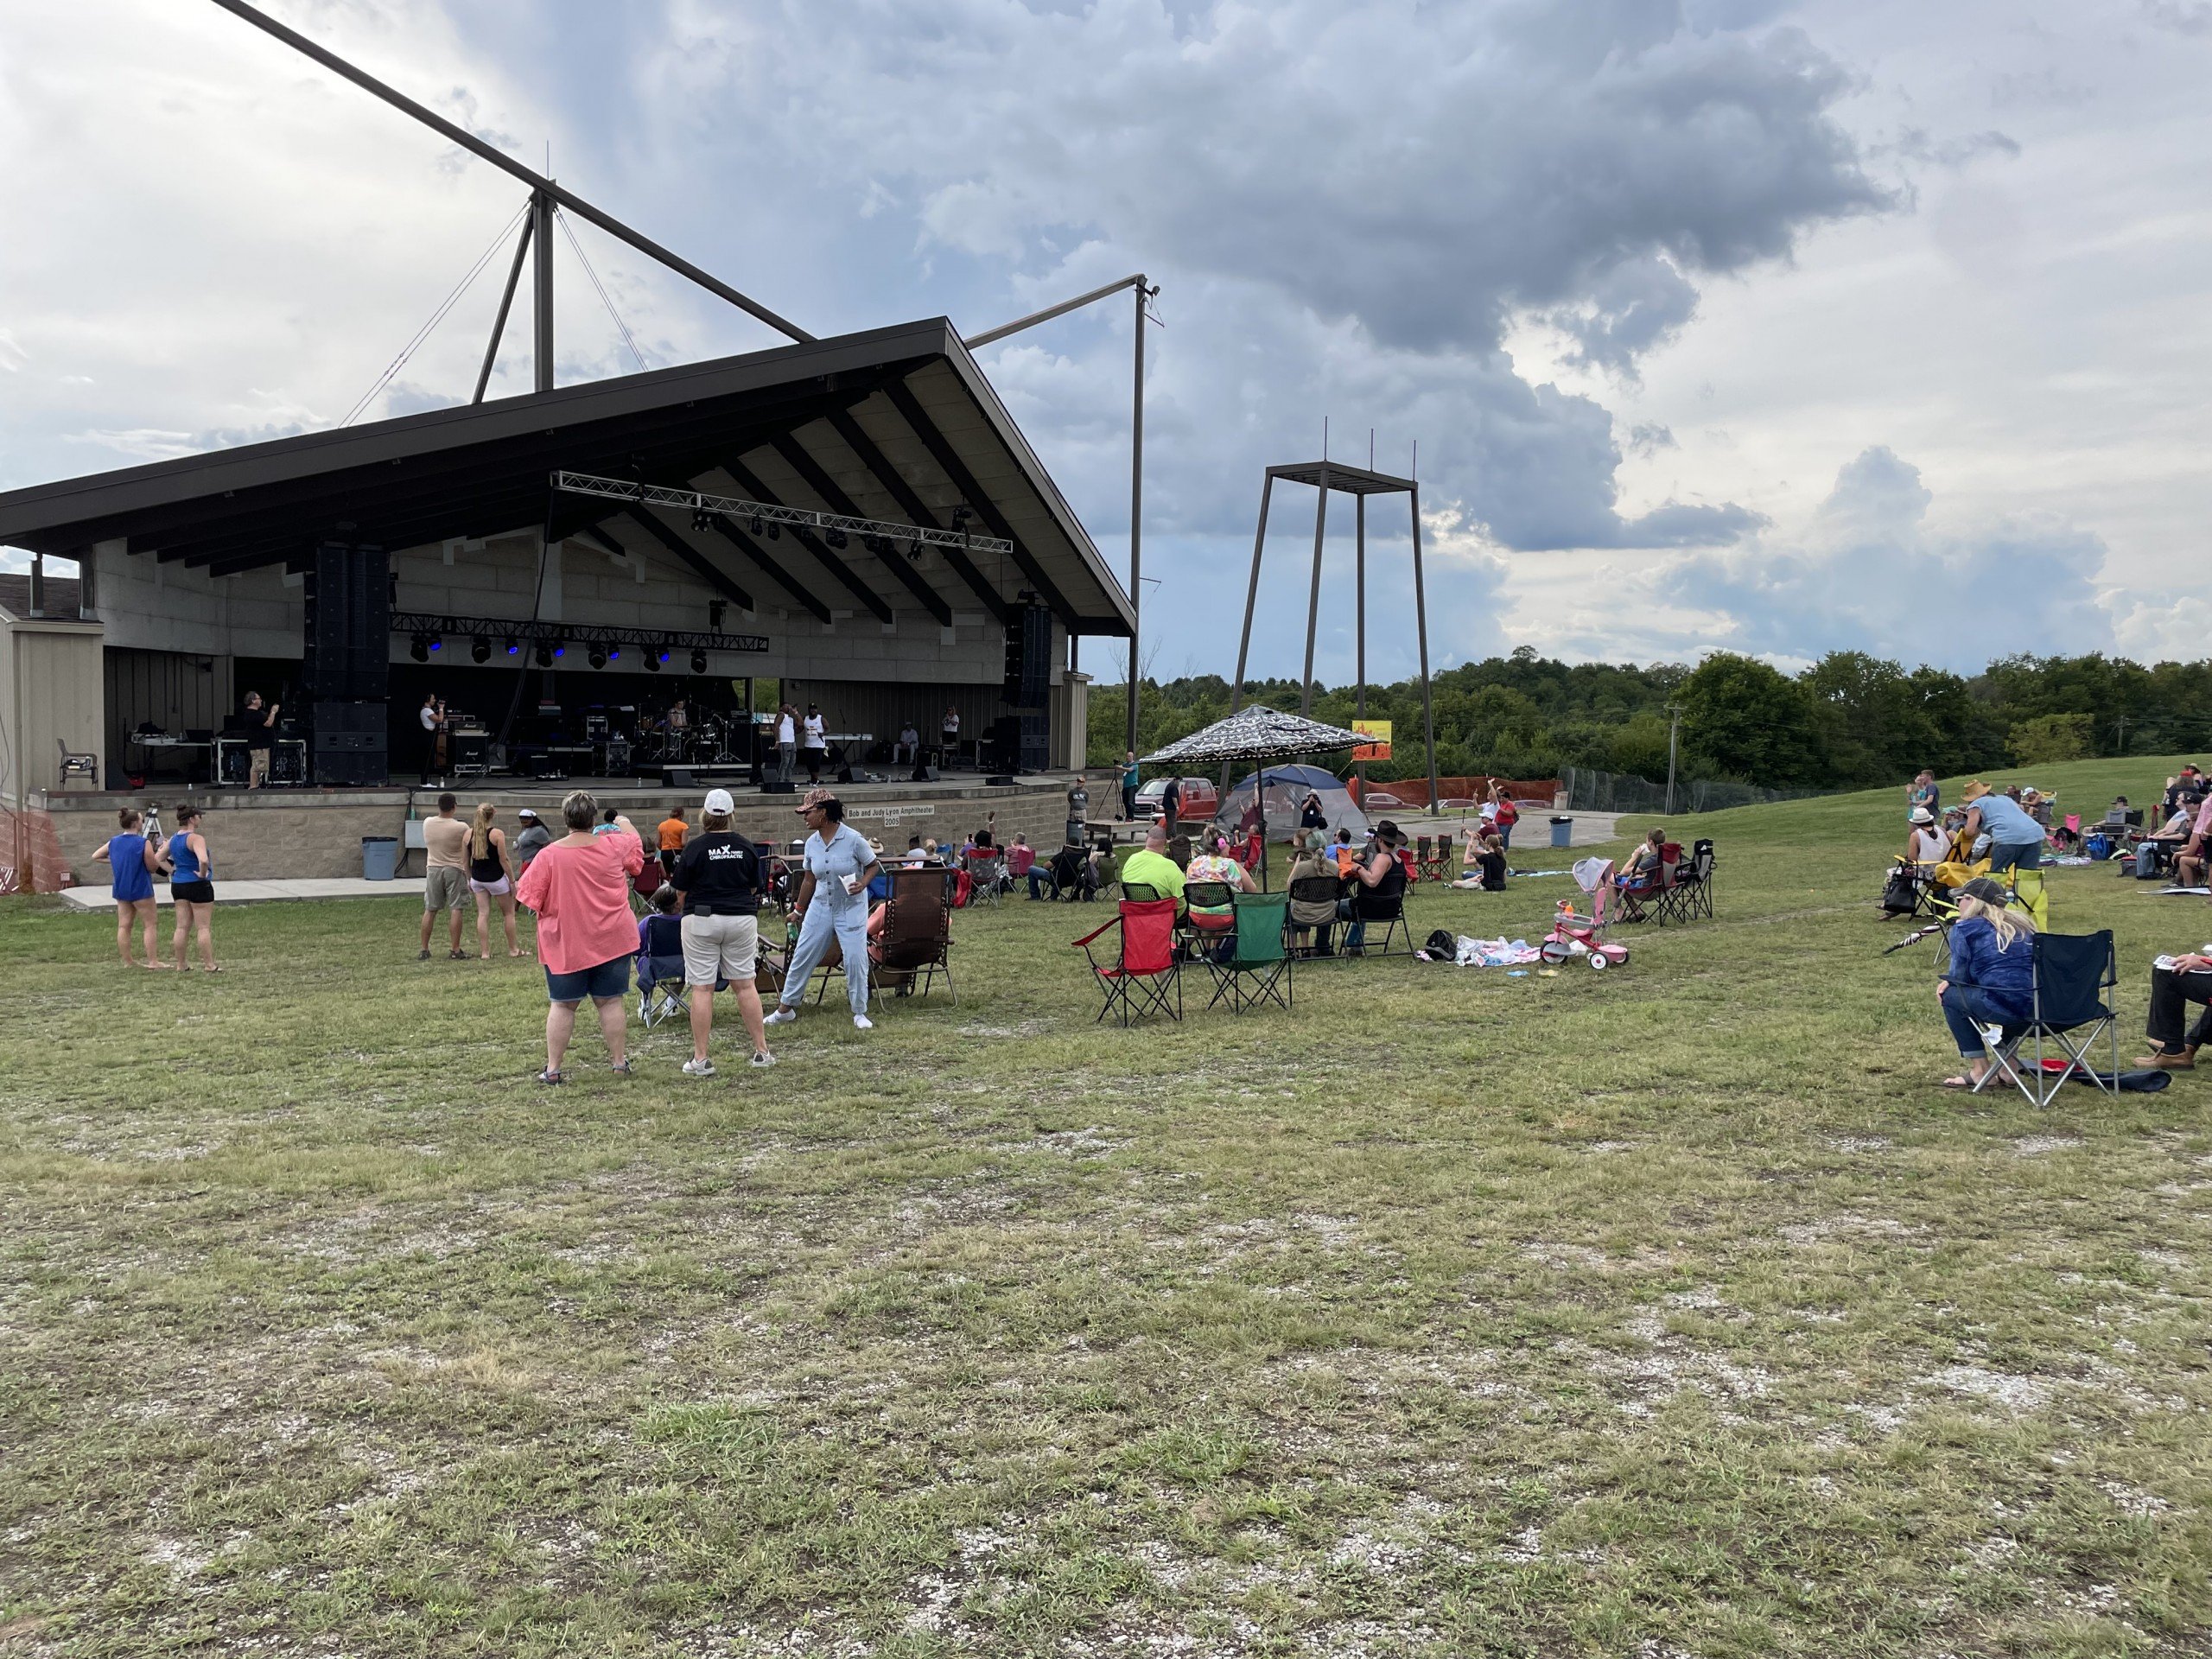 "Ichthus" music festival relaunches after 9 years ABC 36 News